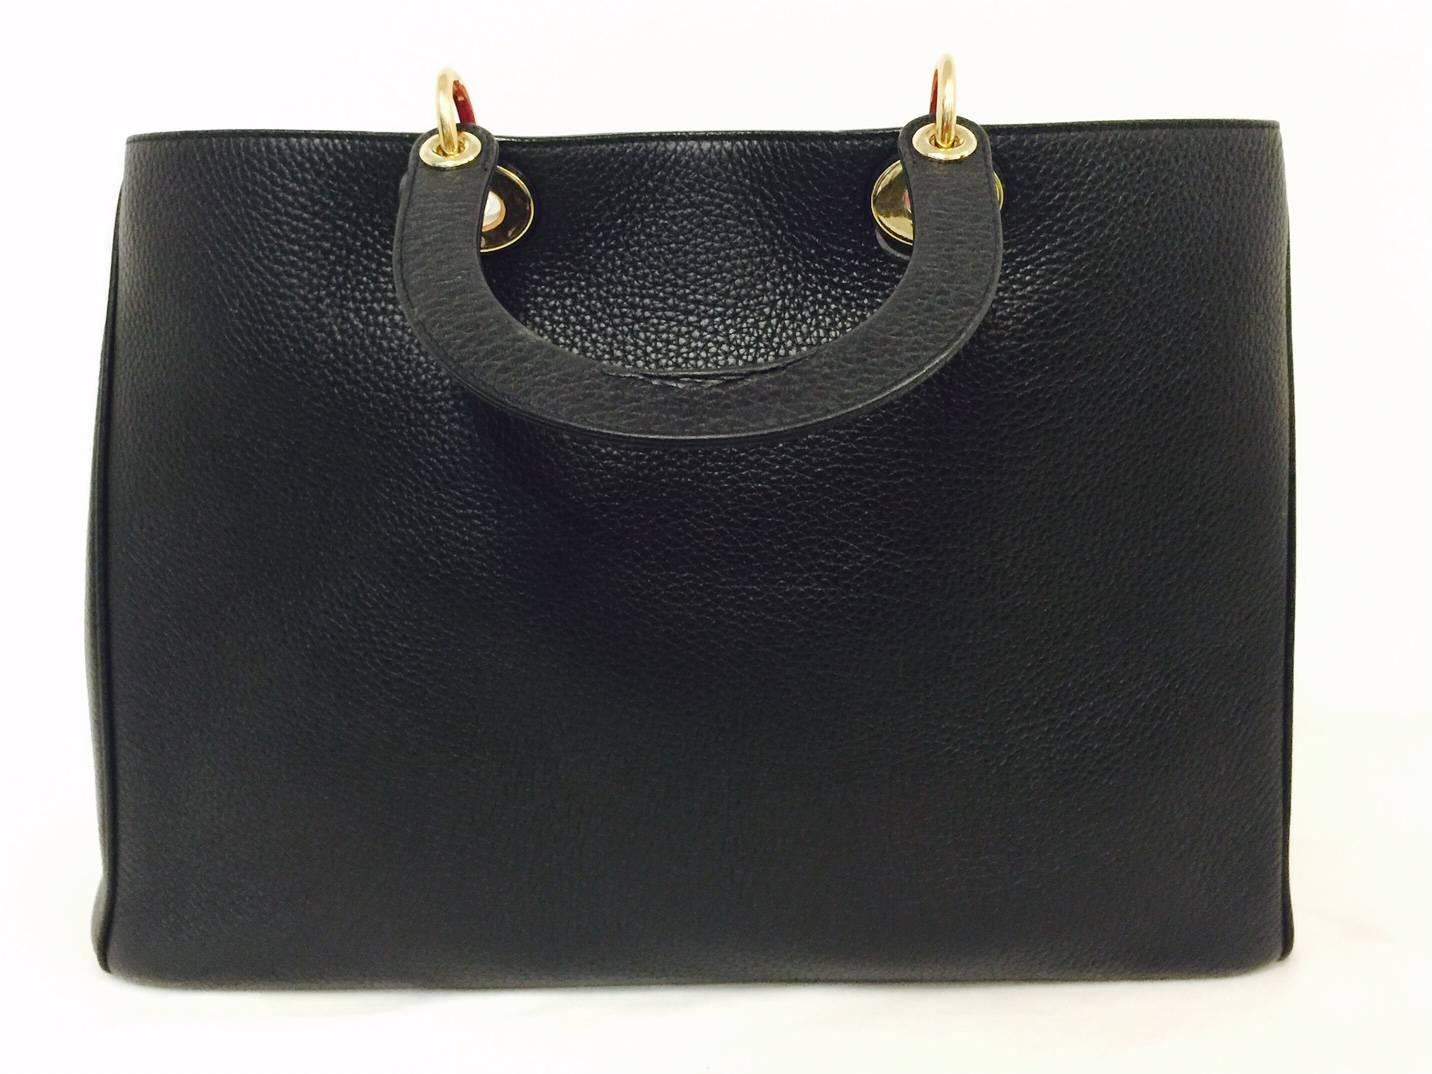 An instant classic and coveted around the globe, this black large Diorissimo is in Way Above Excellent to New Condition!  Exquisitely crafted from luxuriously grained bull calfskin leather, bag features duo black rolled leather top handles with